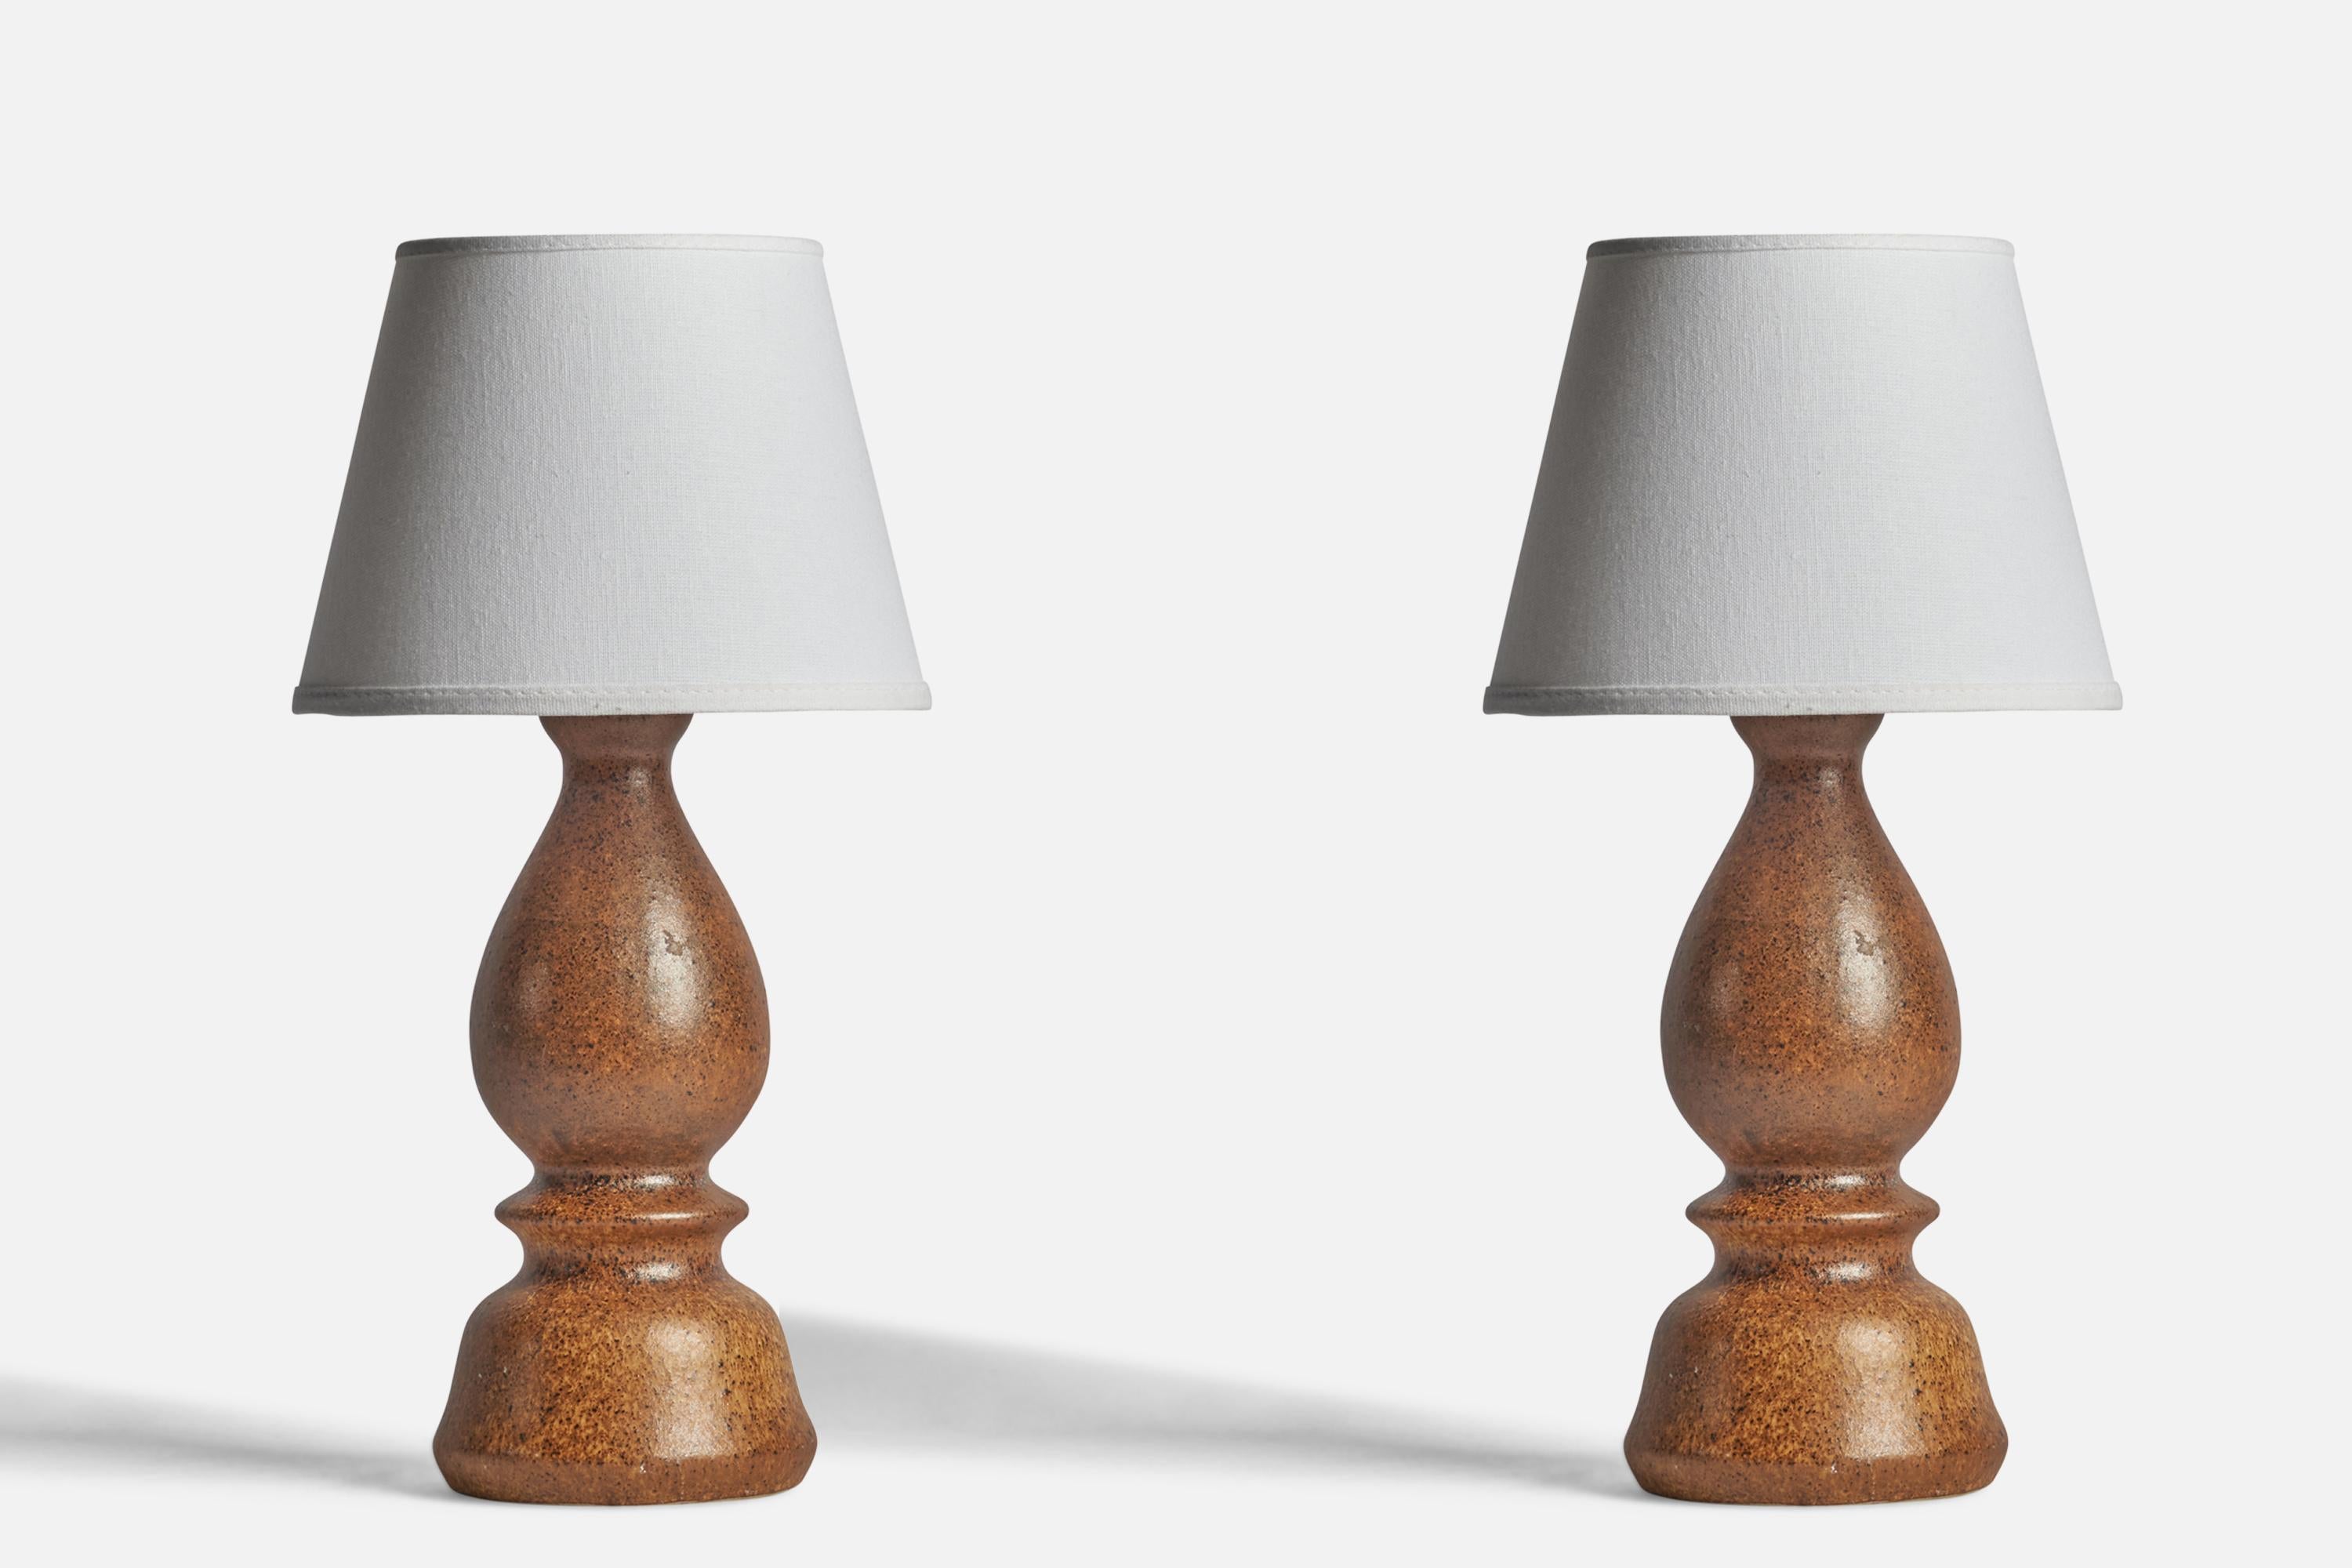 A pair of brown-glazed stoneware table lamps designed by Bruno Karlsson and produced by Ego Stengods, Sweden, 1960s.

Dimensions of Lamp (inches): 13” H x 5” Diameter
Dimensions of Shade (inches): 5” Top Diameter x 8” Bottom Diameter x 6”